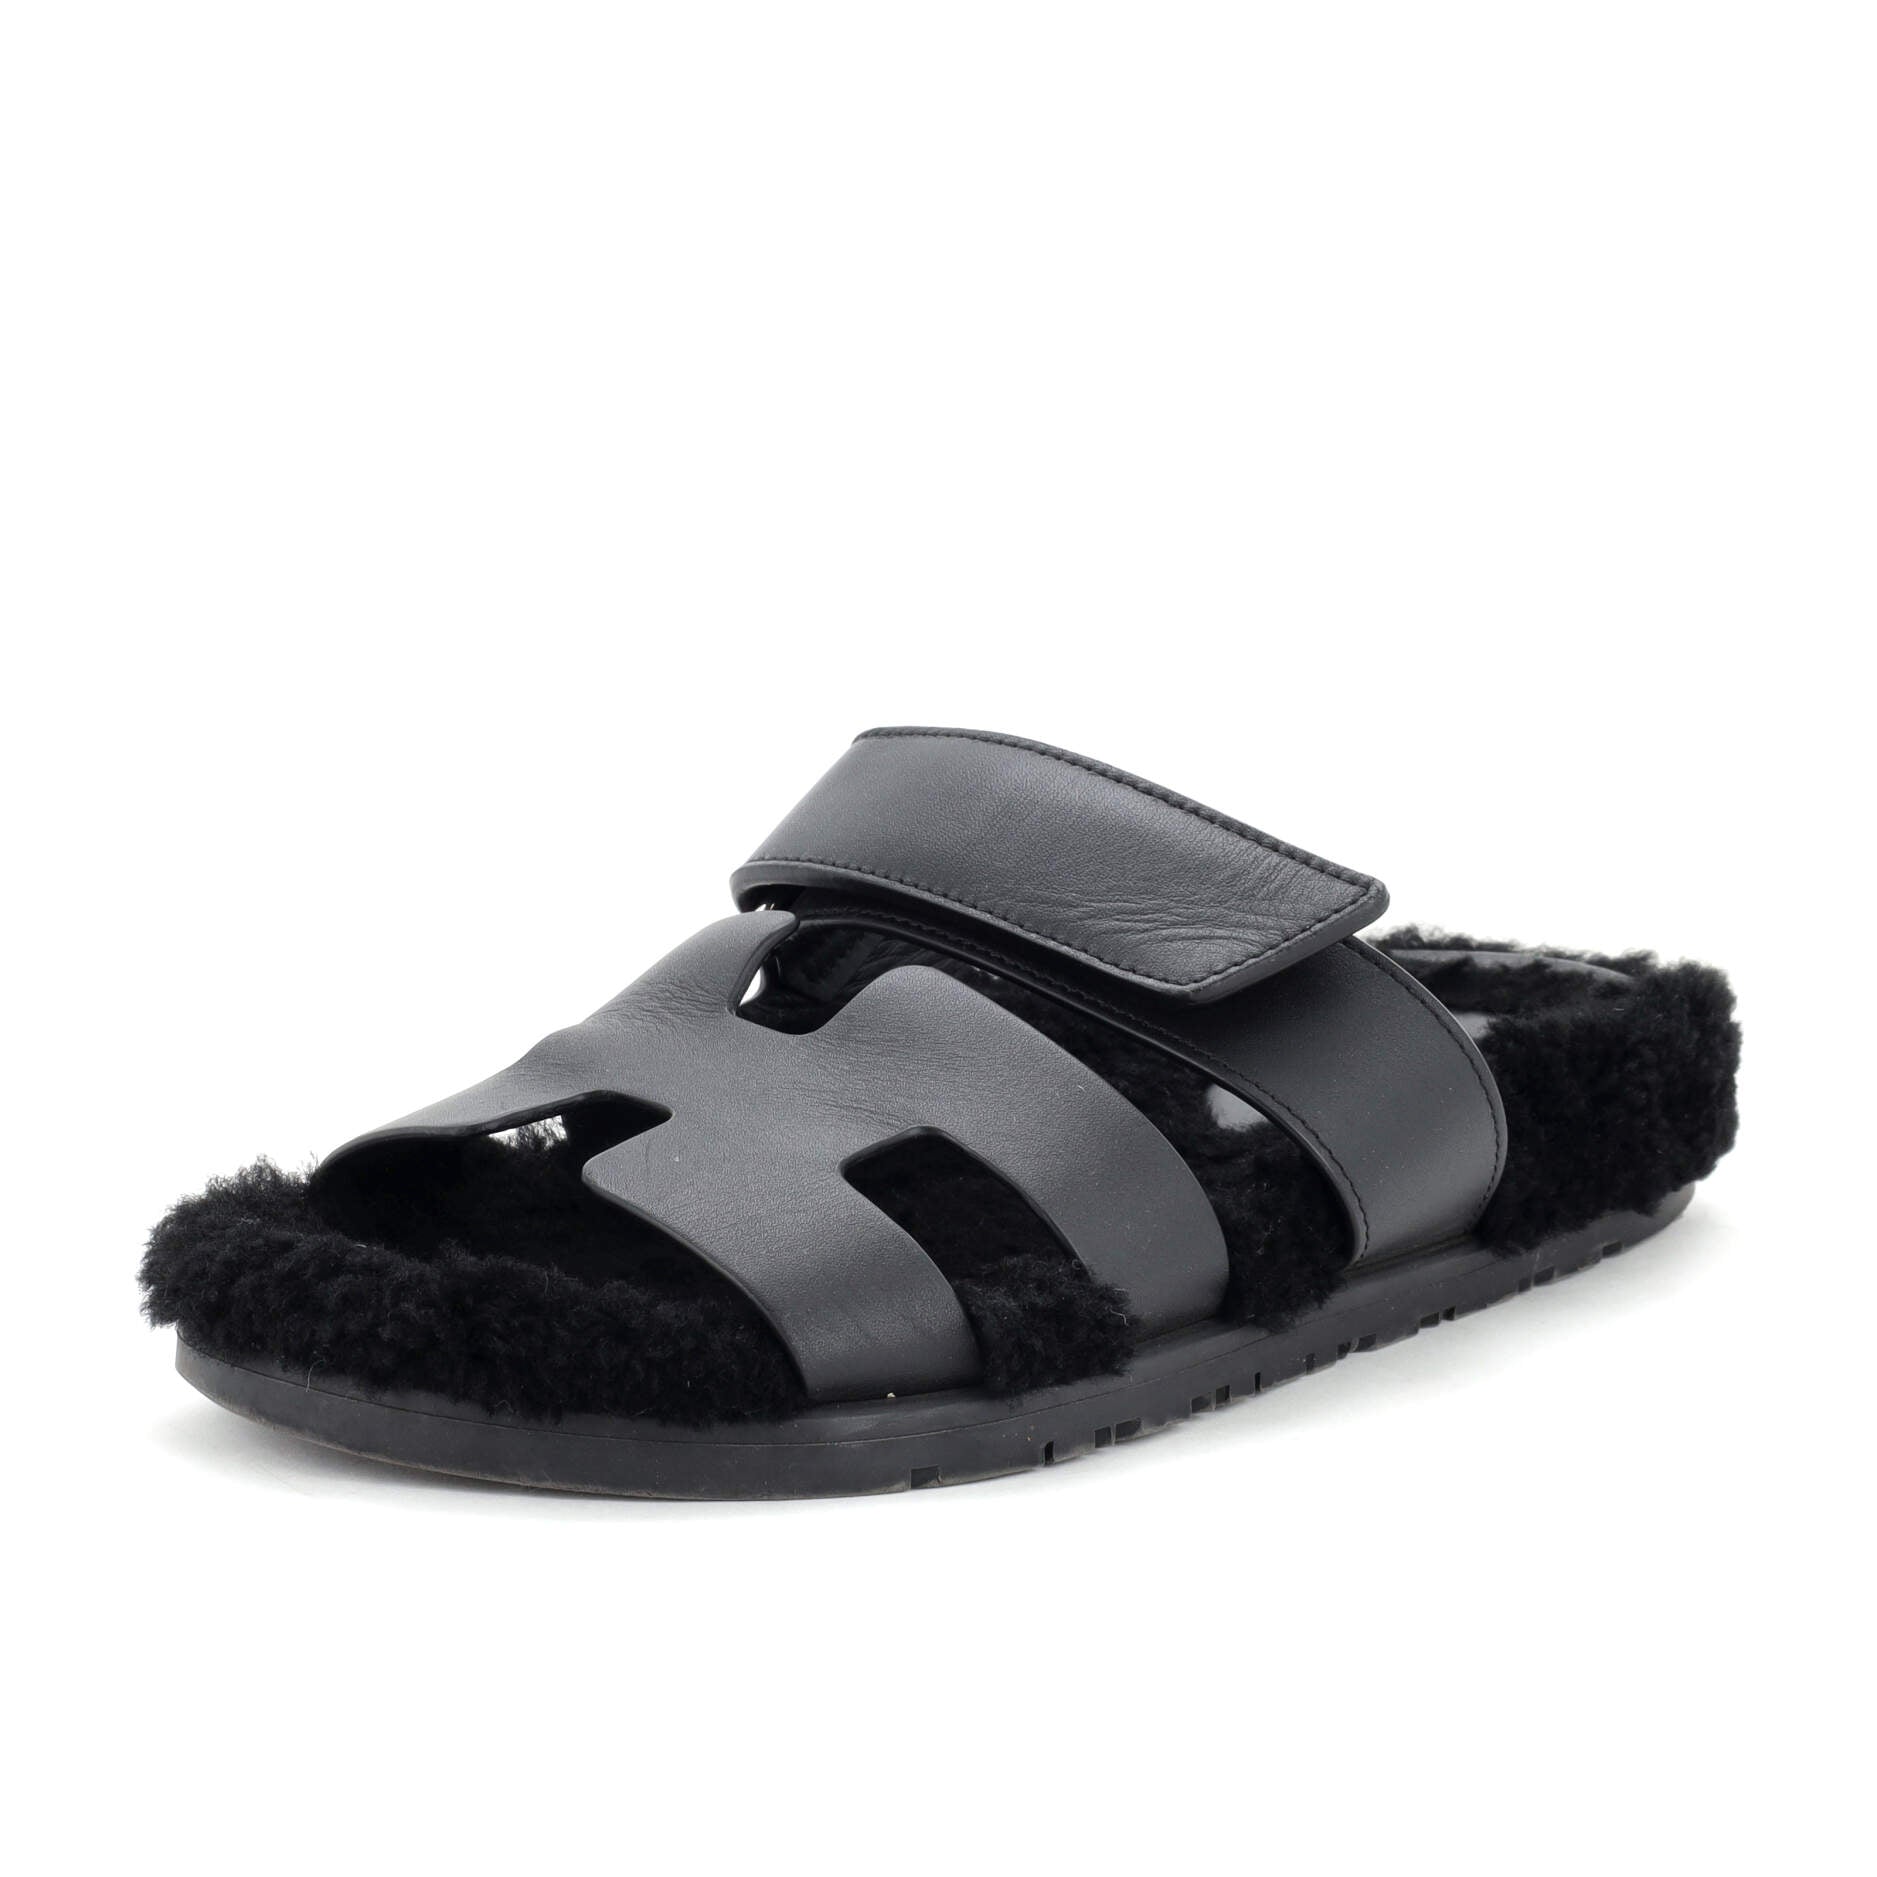 Women's Chypre Sandals Leather with Shearling